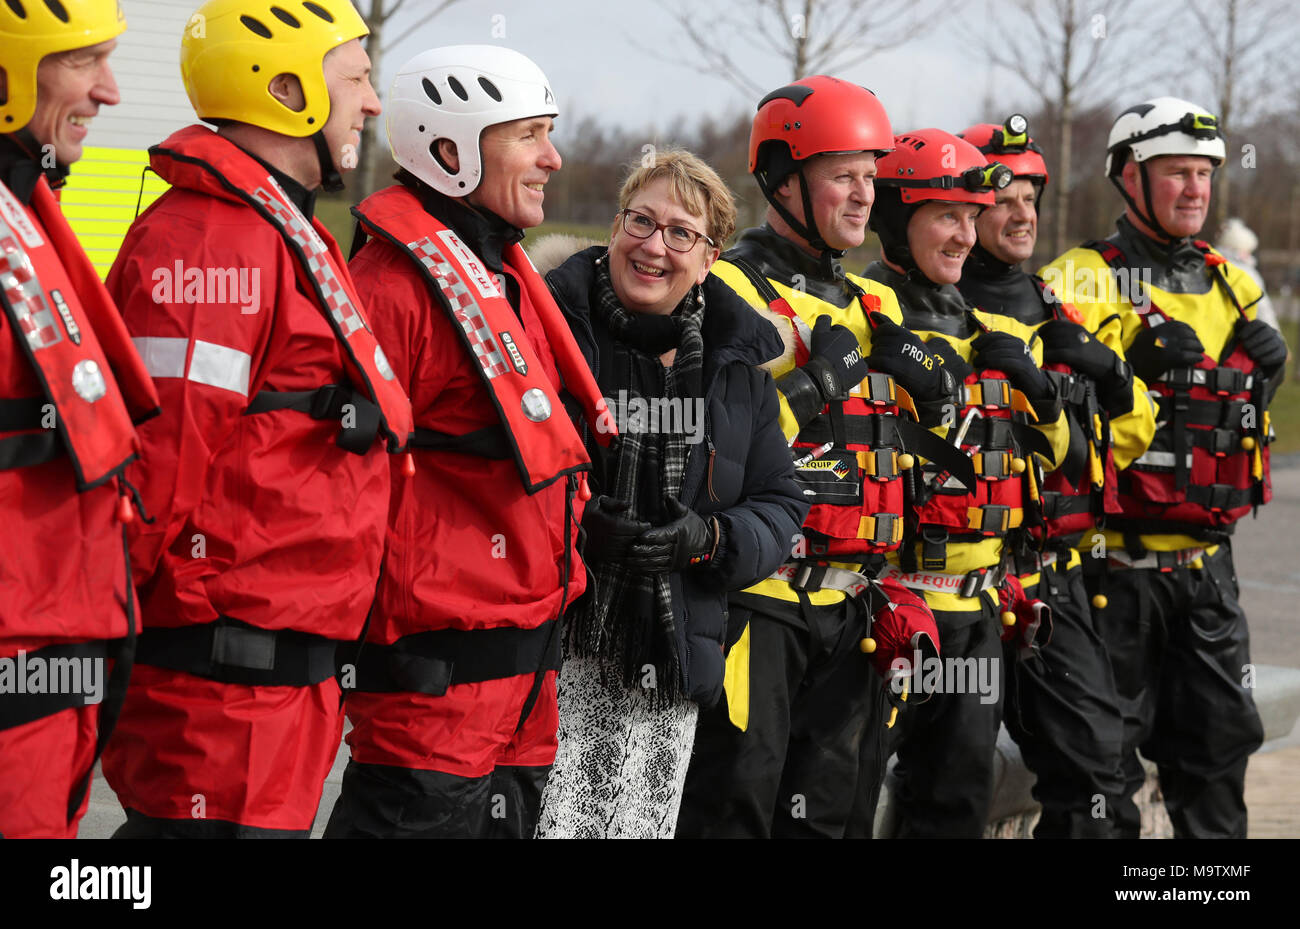 Community Safety Minister Annabelle Ewing chats with firemen from Falkirk and Bathgate stations after she was given a live water rescue demonstration at Falkirk's Helix Park, as she helps mark five years of the Scottish Fire and Rescue Service. Stock Photo